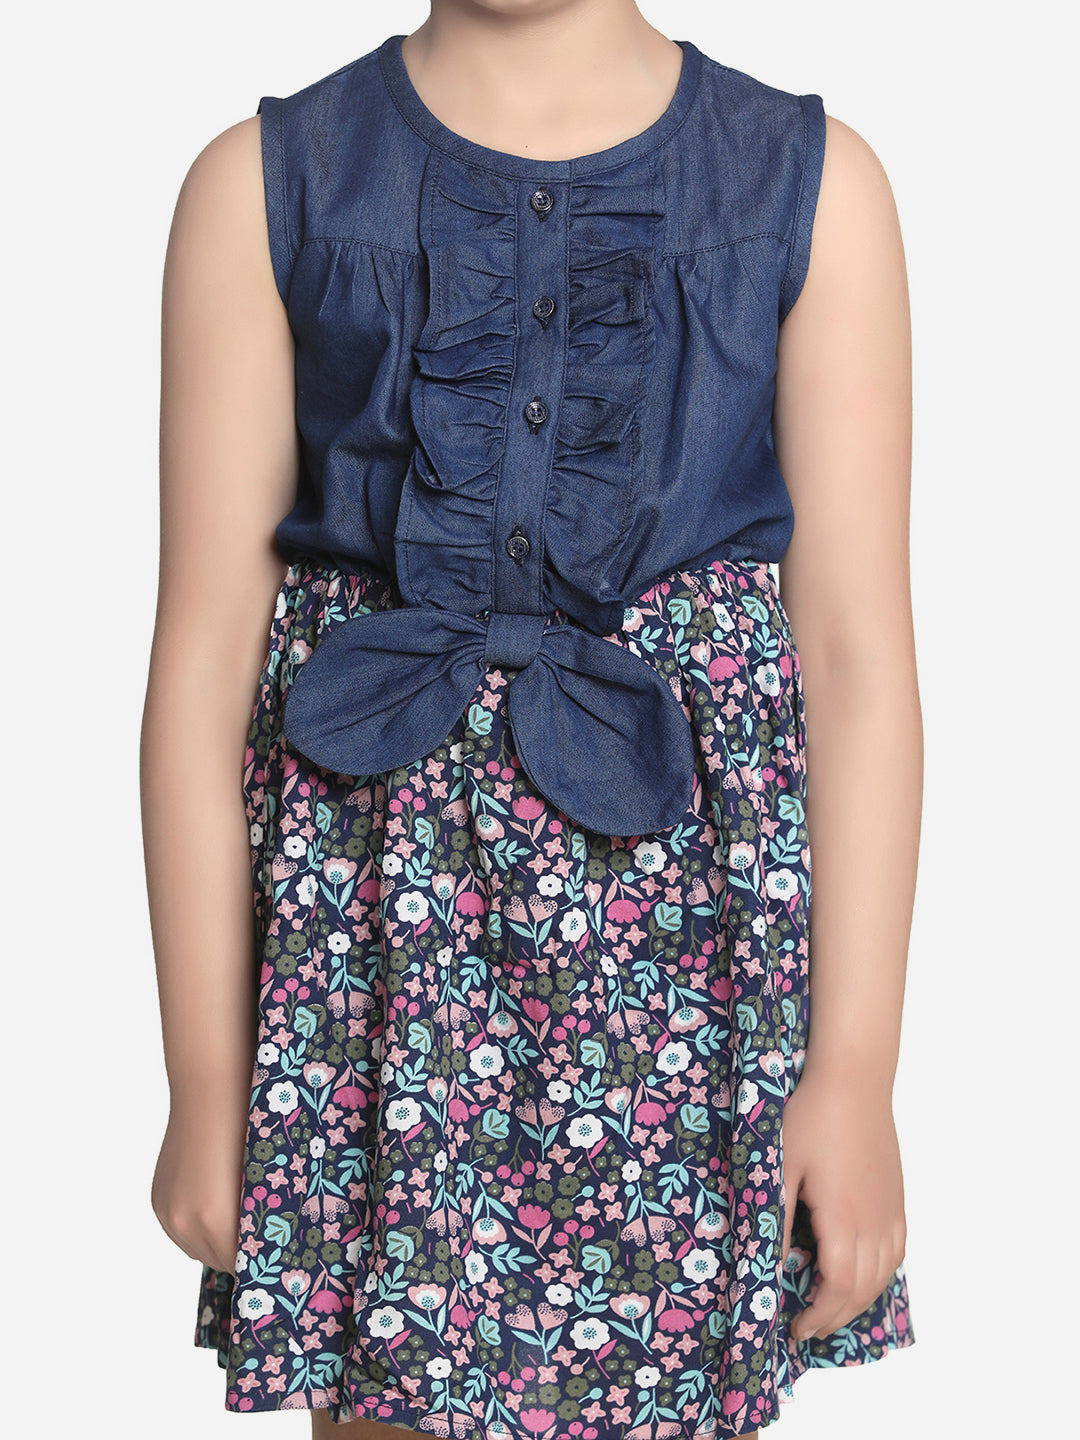 Girls Denim and Floral Cotton Printed Dress